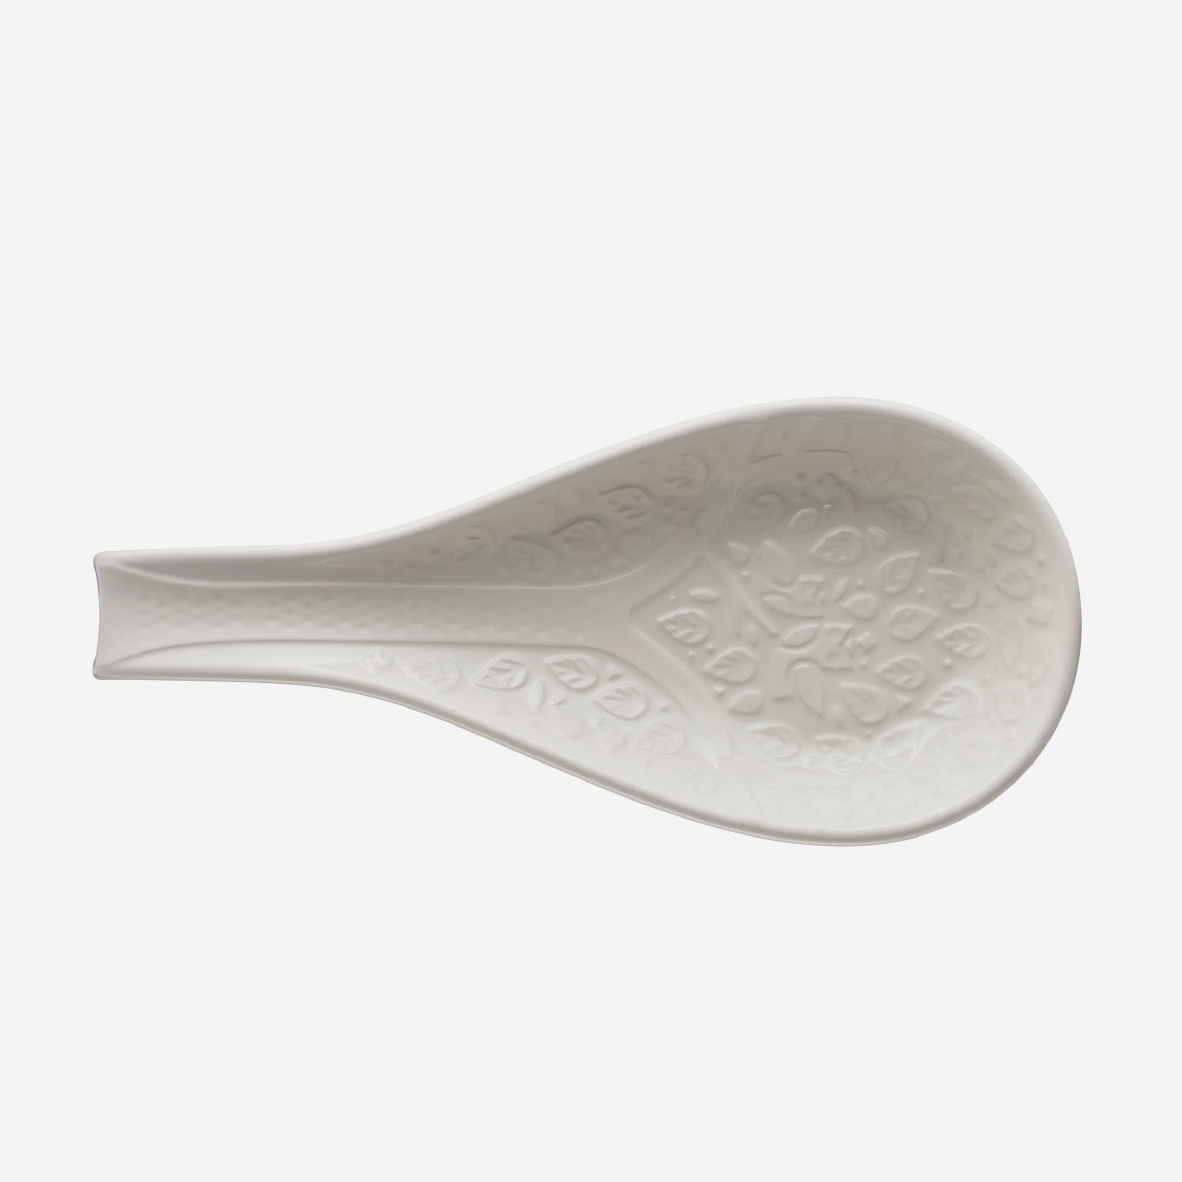 In The Forest Spoon Rest - Cream